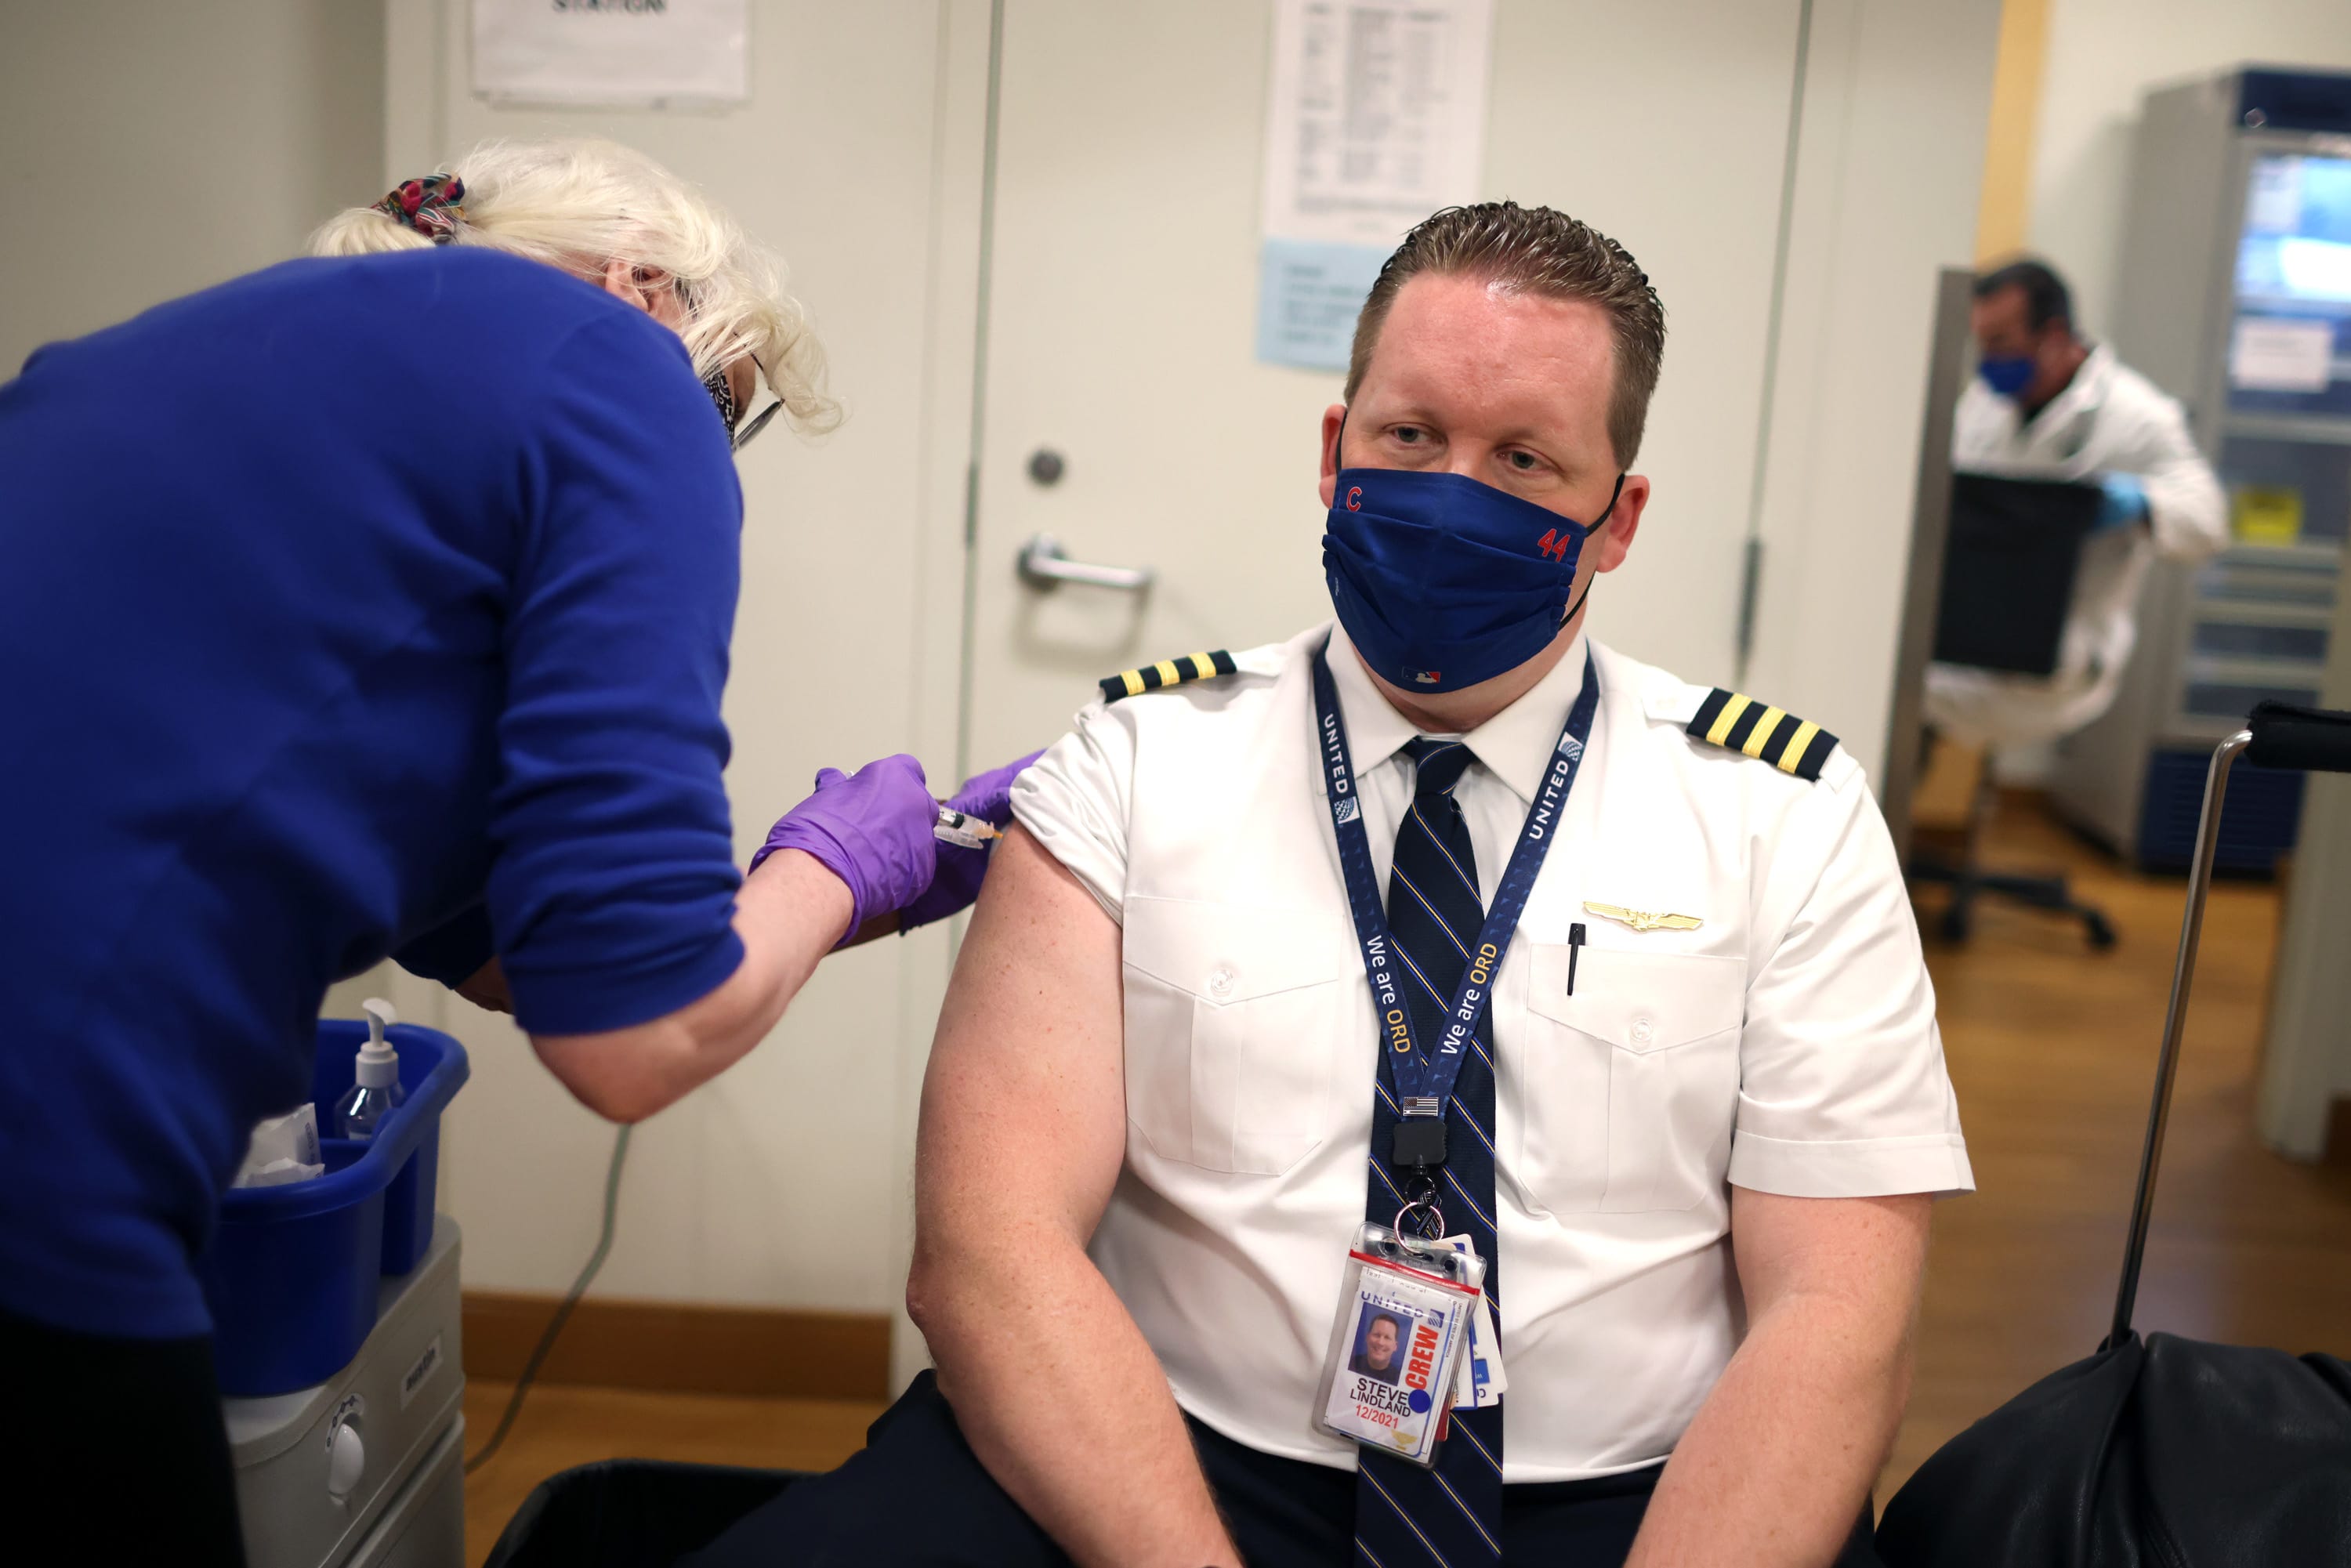 United Airlines will require its 67,000 U.S. employees to get vaccinated, a first for domestic carriers